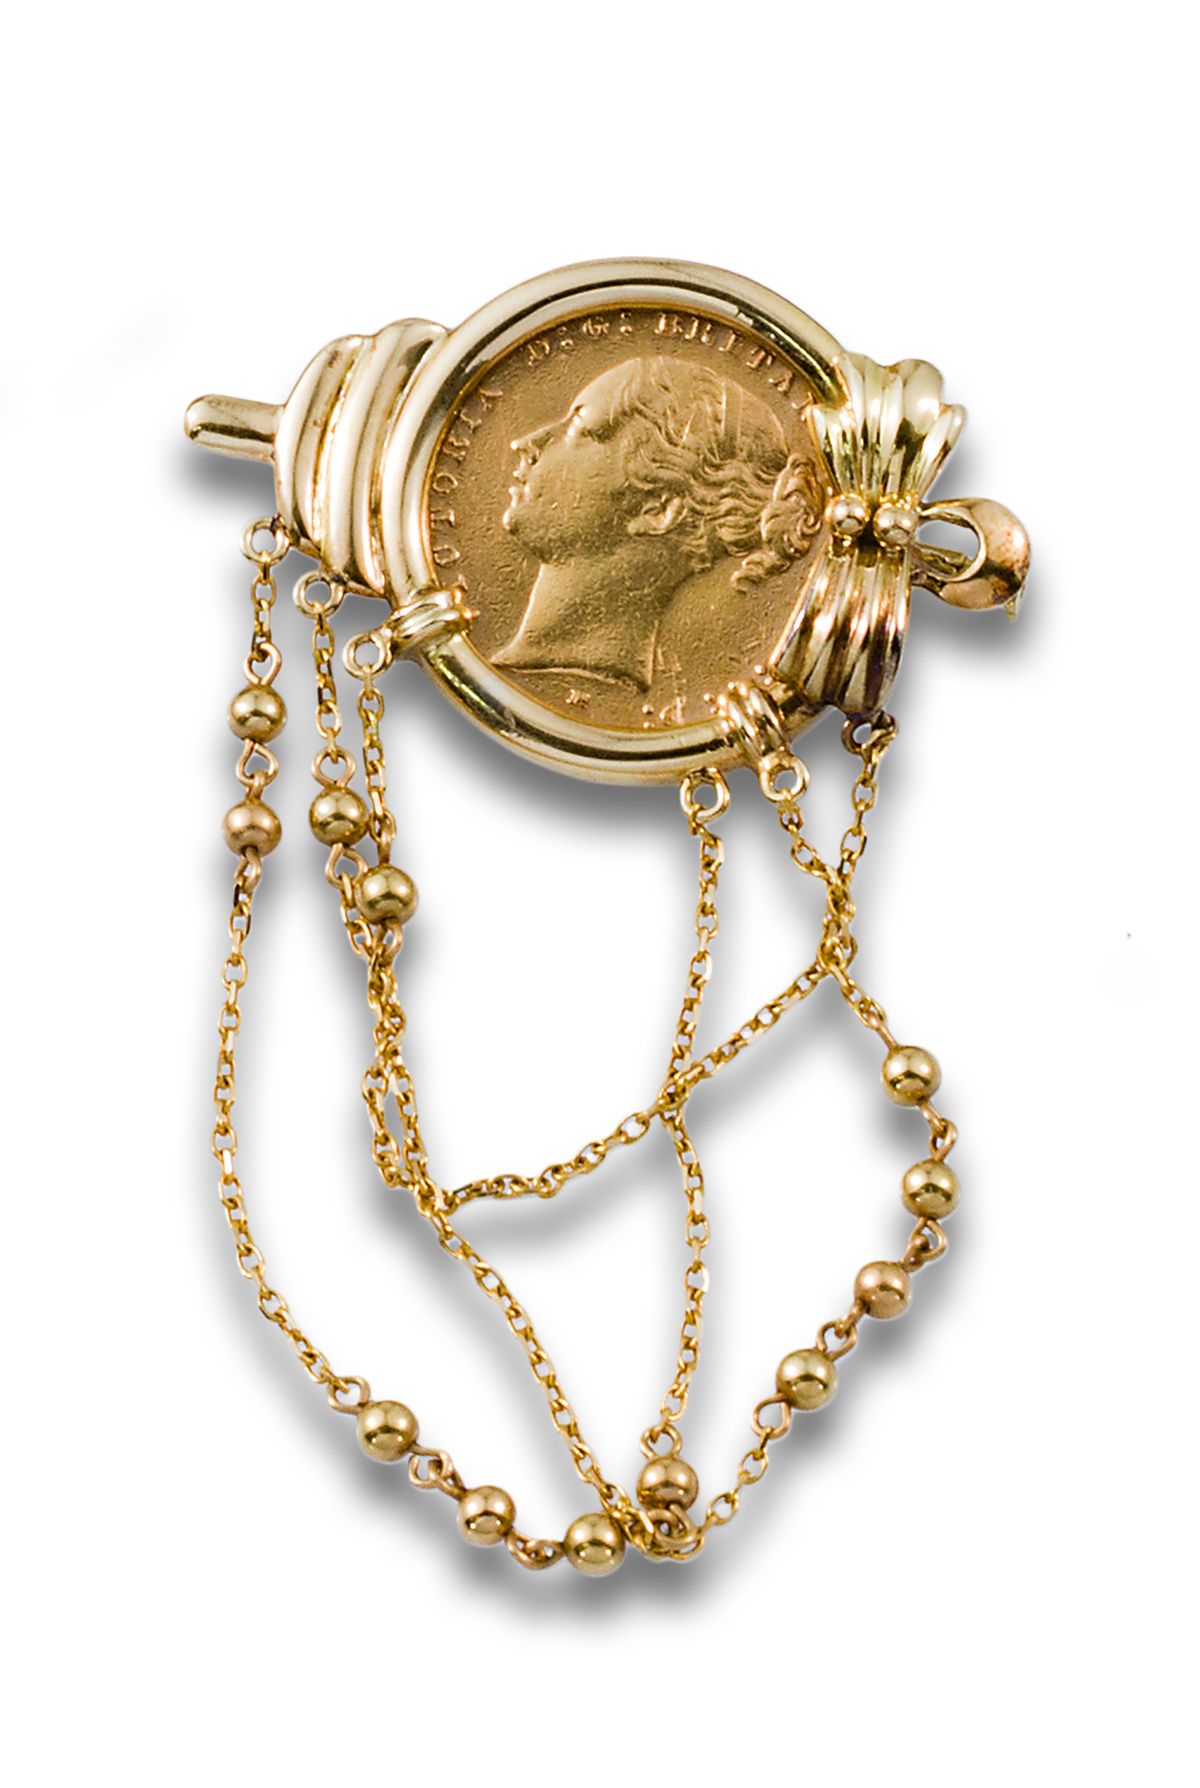 18 kt. Yellow gold brooch-pin consisting of a 1 sovereign coin, Queen Victoria, &hellip;